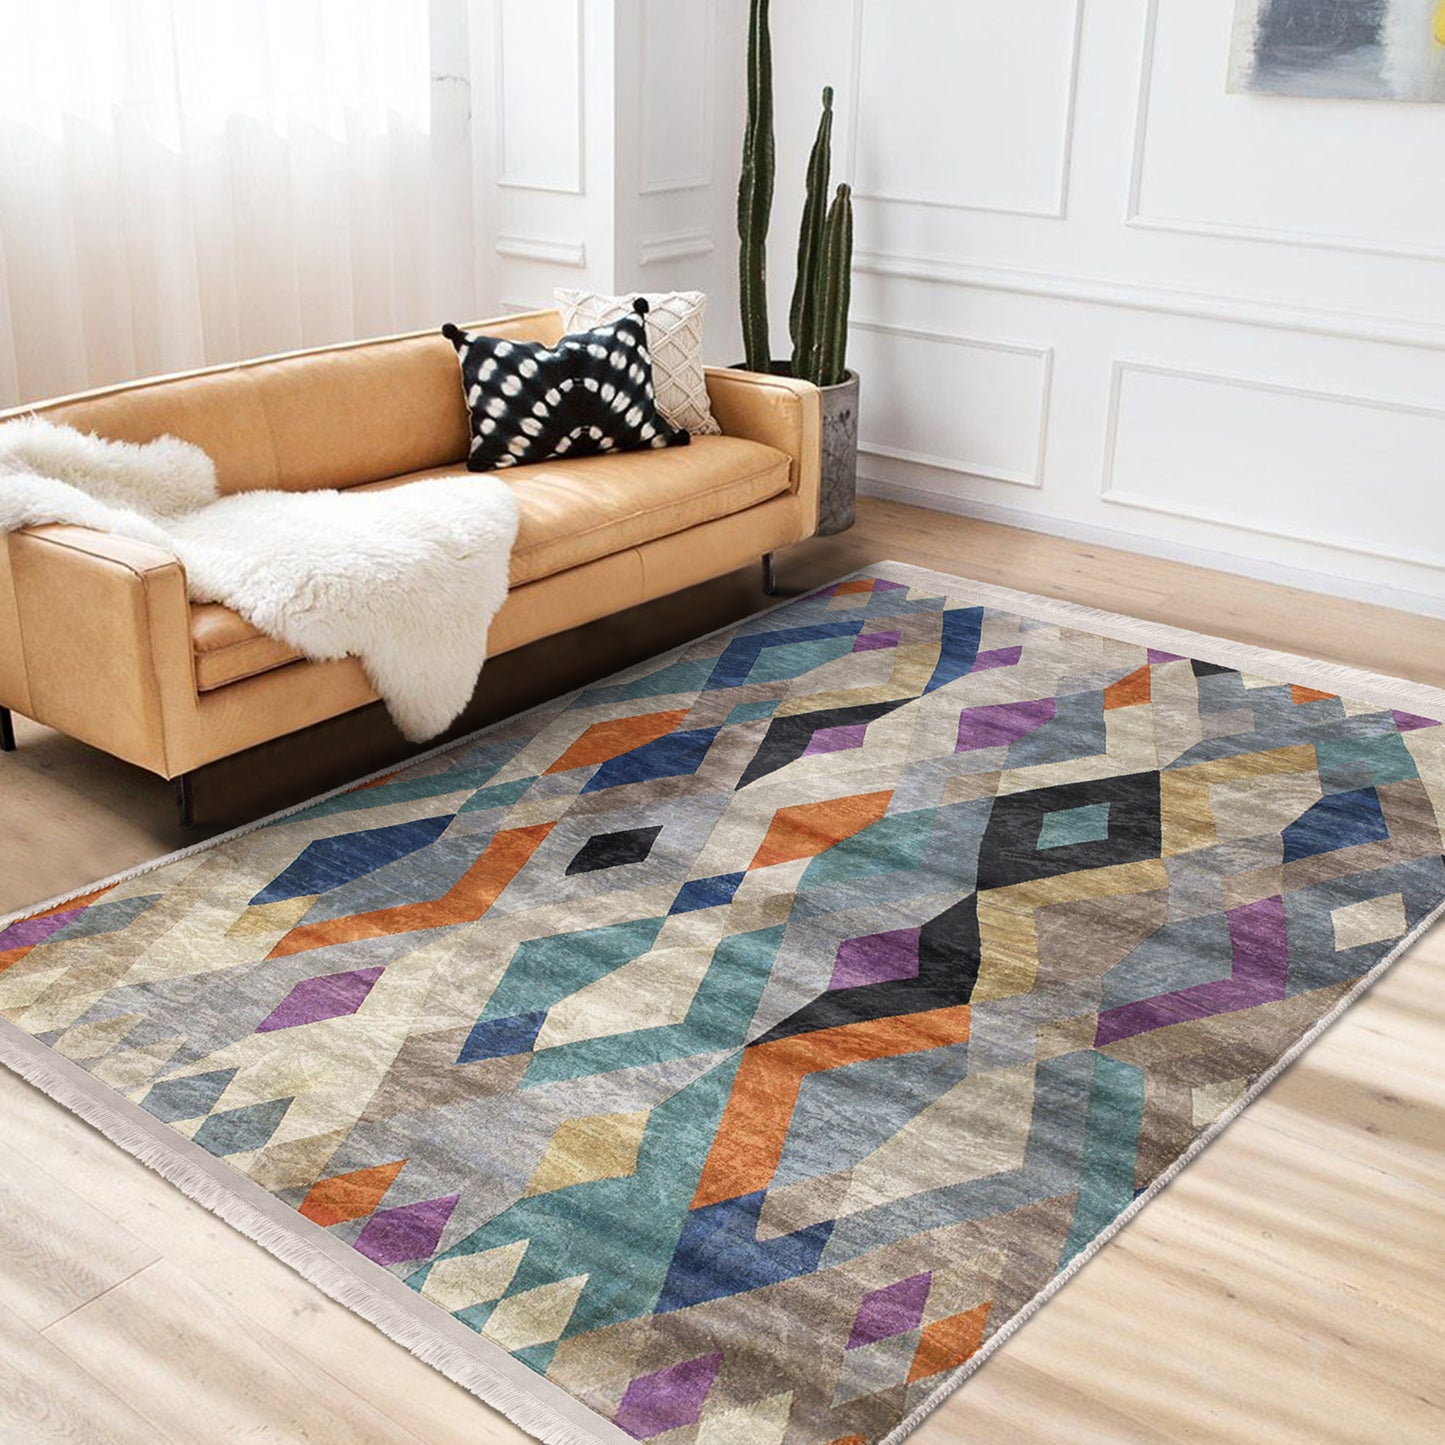 Colourful Bohemian washable area rug: Add flair to your space. Homeezone design.